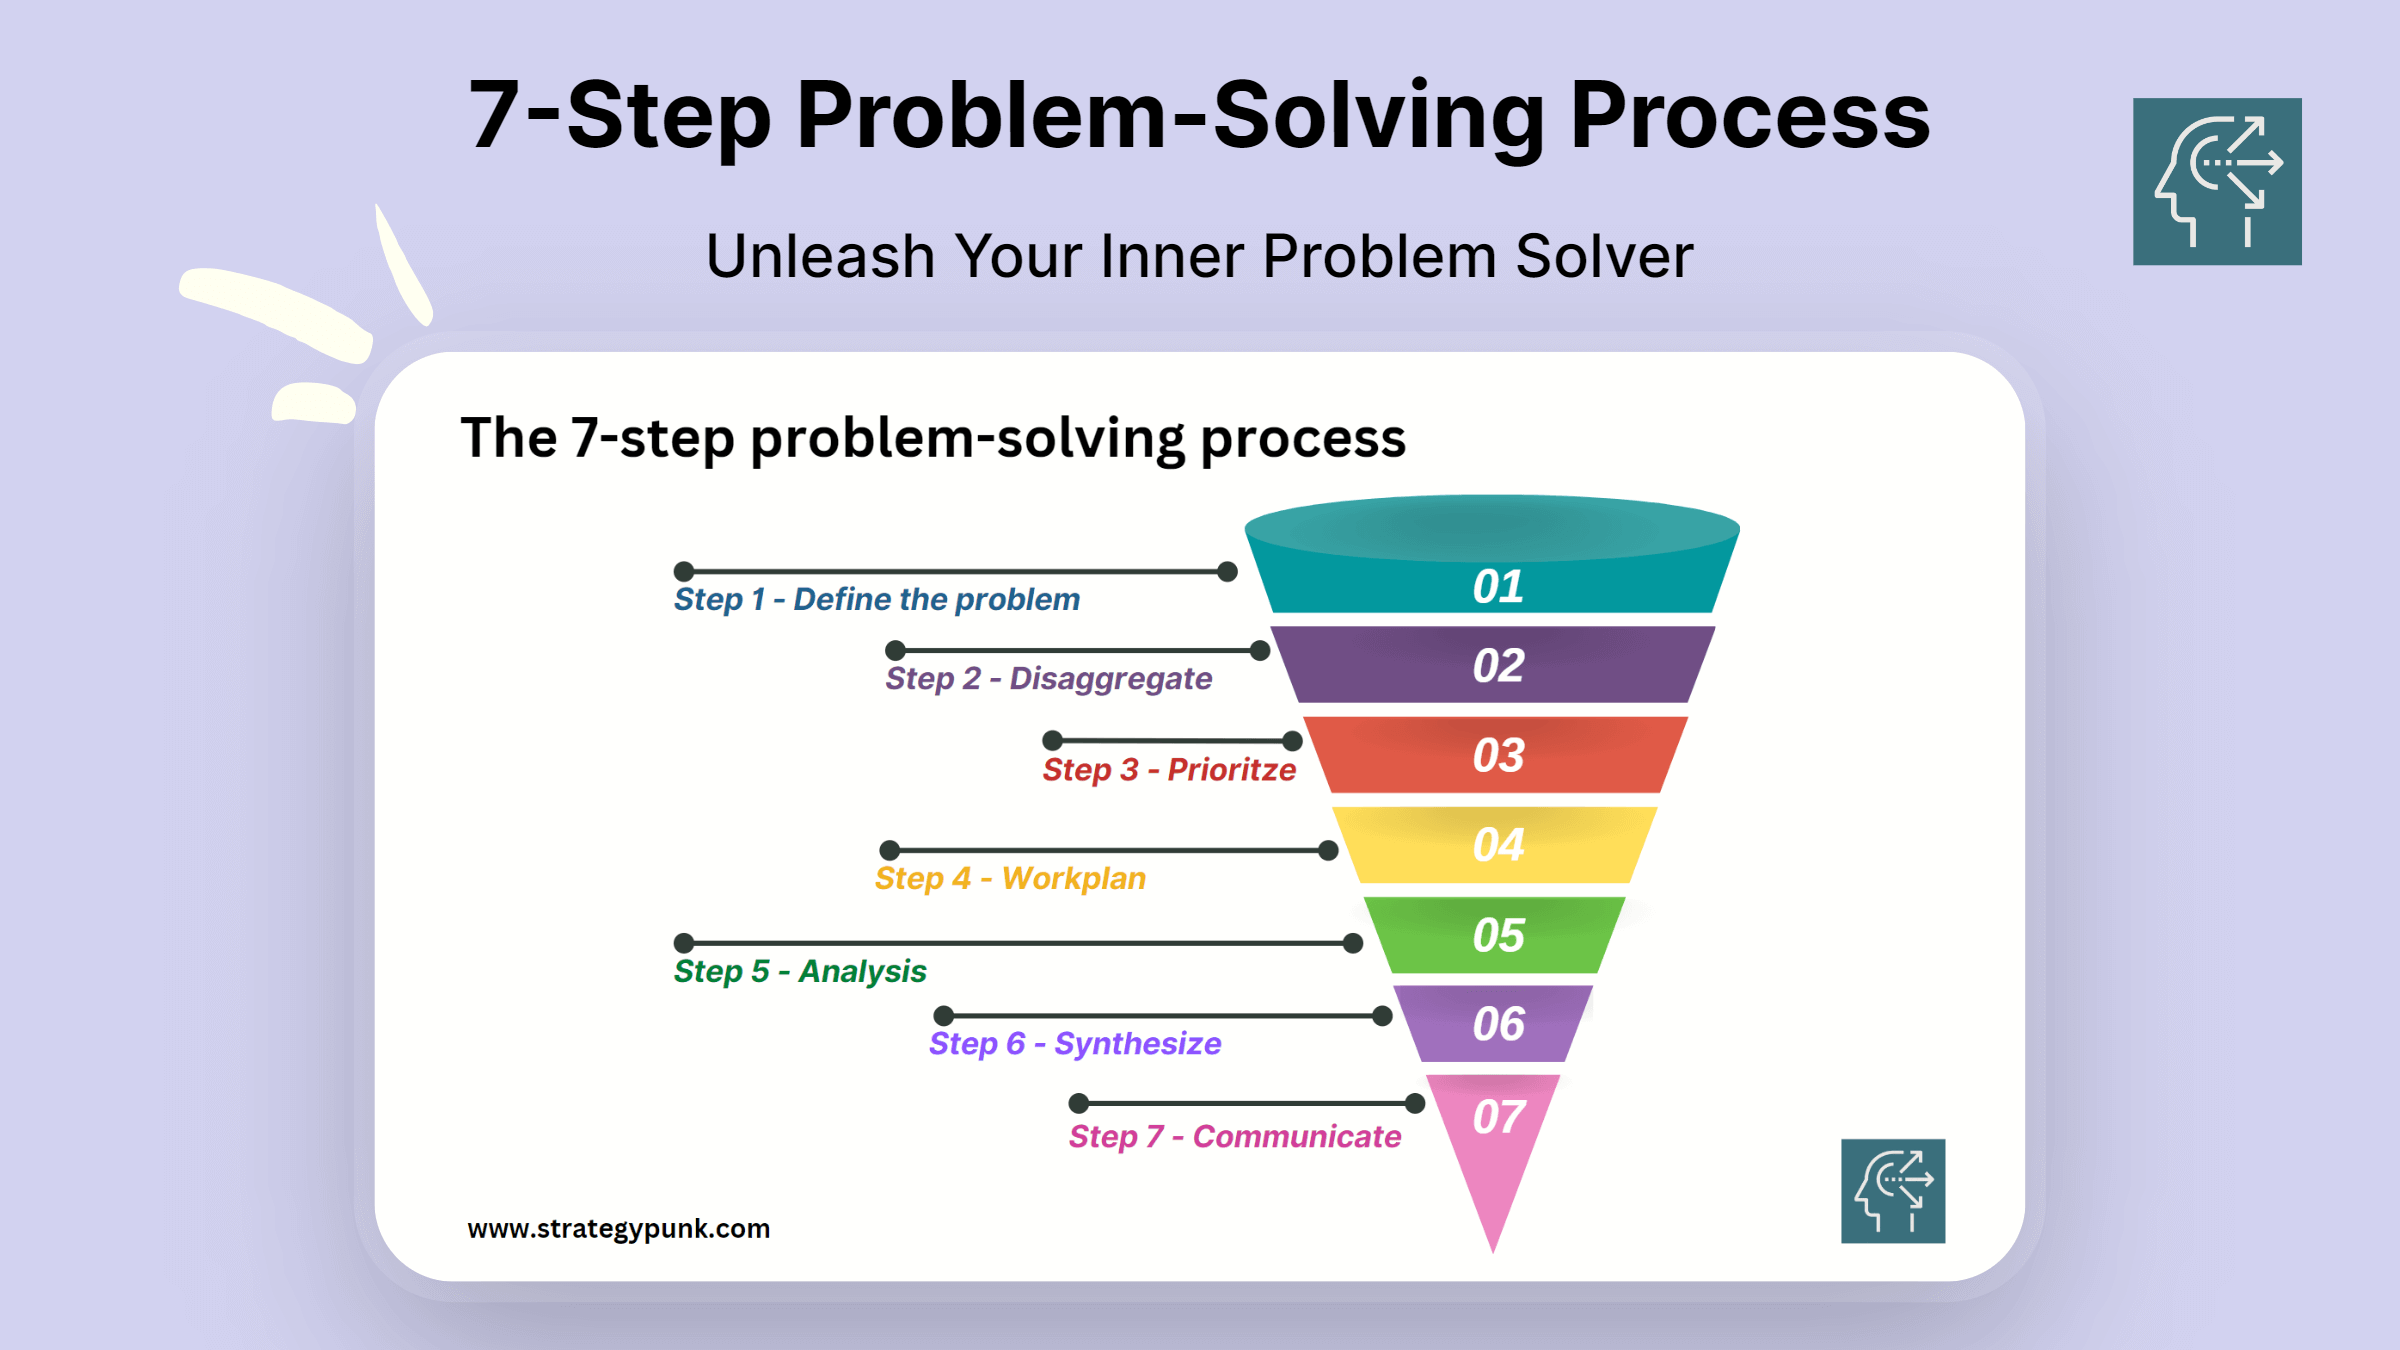 Master the 7-Step Problem-Solving Process for Better Decision-Making